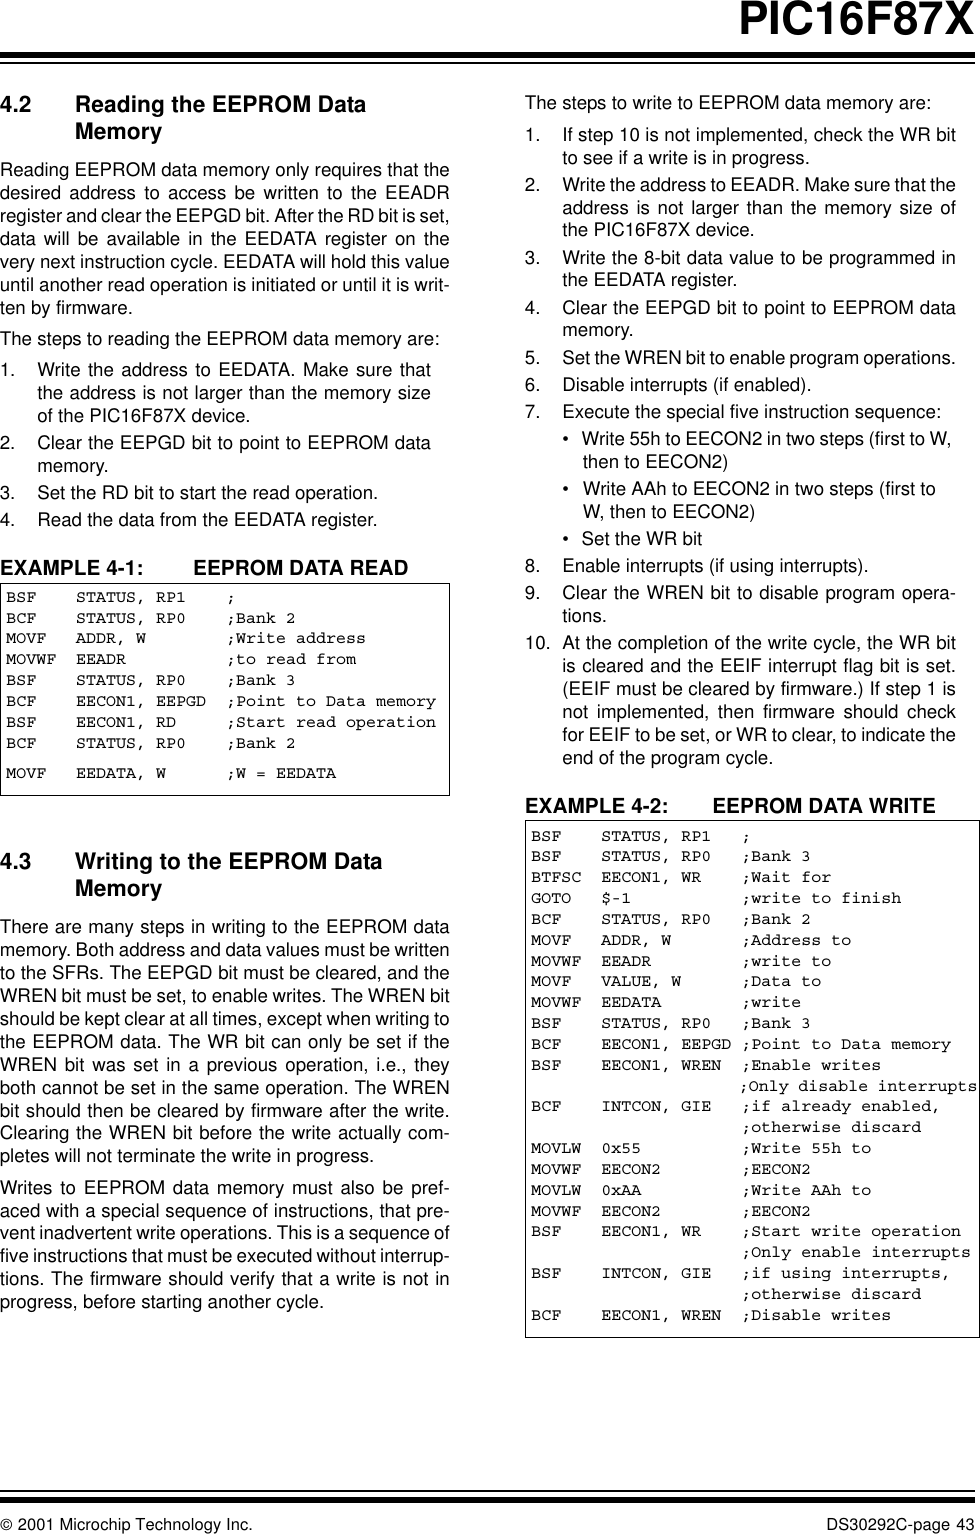  2001 Microchip Technology Inc. DS30292C-page 43PIC16F87X4.2 Reading the EEPROM Data MemoryReading EEPROM data memory only requires that thedesired address to access be written to the EEADRregister and clear the EEPGD bit. After the RD bit is set,data will be available in the EEDATA register on thevery next instruction cycle. EEDATA will hold this valueuntil another read operation is initiated or until it is writ-ten by firmware. The steps to reading the EEPROM data memory are:1. Write the address to EEDATA. Make sure thatthe address is not larger than the memory sizeof the PIC16F87X device.2. Clear the EEPGD bit to point to EEPROM datamemory.3. Set the RD bit to start the read operation.4. Read the data from the EEDATA register.EXAMPLE 4-1:  EEPROM DATA READ4.3 Writing to the EEPROM Data MemoryThere are many steps in writing to the EEPROM datamemory. Both address and data values must be writtento the SFRs. The EEPGD bit must be cleared, and theWREN bit must be set, to enable writes. The WREN bitshould be kept clear at all times, except when writing tothe EEPROM data. The WR bit can only be set if theWREN bit was set in a previous operation, i.e., theyboth cannot be set in the same operation. The WRENbit should then be cleared by firmware after the write.Clearing the WREN bit before the write actually com-pletes will not terminate the write in progress. Writes to EEPROM data memory must also be pref-aced with a special sequence of instructions, that pre-vent inadvertent write operations. This is a sequence offive instructions that must be executed without interrup-tions. The firmware should verify that a write is not inprogress, before starting another cycle.The steps to write to EEPROM data memory are:1. If step 10 is not implemented, check the WR bitto see if a write is in progress.2. Write the address to EEADR. Make sure that theaddress is not larger than the memory size ofthe PIC16F87X device.3. Write the 8-bit data value to be programmed inthe EEDATA register.4. Clear the EEPGD bit to point to EEPROM datamemory.5. Set the WREN bit to enable program operations.6. Disable interrupts (if enabled).7. Execute the special five instruction sequence:•Write 55h to EECON2 in two steps (first to W, then to EECON2)•Write AAh to EECON2 in two steps (first to W, then to EECON2)•Set the WR bit8. Enable interrupts (if using interrupts).9. Clear the WREN bit to disable program opera-tions.10. At the completion of the write cycle, the WR bitis cleared and the EEIF interrupt flag bit is set.(EEIF must be cleared by firmware.) If step 1 isnot implemented, then firmware should checkfor EEIF to be set, or WR to clear, to indicate theend of the program cycle.EXAMPLE 4-2: EEPROM DATA WRITEBSF    STATUS, RP1    ;BCF    STATUS, RP0    ;Bank 2MOVF   ADDR, W        ;Write addressMOVWF  EEADR          ;to read fromBSF    STATUS, RP0    ;Bank 3BCF    EECON1, EEPGD  ;Point to Data memoryBSF    EECON1, RD     ;Start read operationBCF    STATUS, RP0    ;Bank 2MOVF   EEDATA, W      ;W = EEDATABSF    STATUS, RP1   ;BSF    STATUS, RP0   ;Bank 3BTFSC  EECON1, WR    ;Wait forGOTO   $-1           ;write to finishBCF    STATUS, RP0   ;Bank 2MOVF   ADDR, W       ;Address toMOVWF  EEADR         ;write toMOVF   VALUE, W      ;Data toMOVWF  EEDATA        ;writeBSF    STATUS, RP0   ;Bank 3BCF    EECON1, EEPGD ;Point to Data memoryBSF    EECON1, WREN  ;Enable writes                      ;Only disable interruptsBCF    INTCON, GIE   ;if already enabled,                     ;otherwise discardMOVLW  0x55          ;Write 55h toMOVWF  EECON2        ;EECON2MOVLW  0xAA          ;Write AAh toMOVWF  EECON2        ;EECON2BSF    EECON1, WR    ;Start write operation                     ;Only enable interruptsBSF    INTCON, GIE   ;if using interrupts,                     ;otherwise discardBCF    EECON1, WREN  ;Disable writes